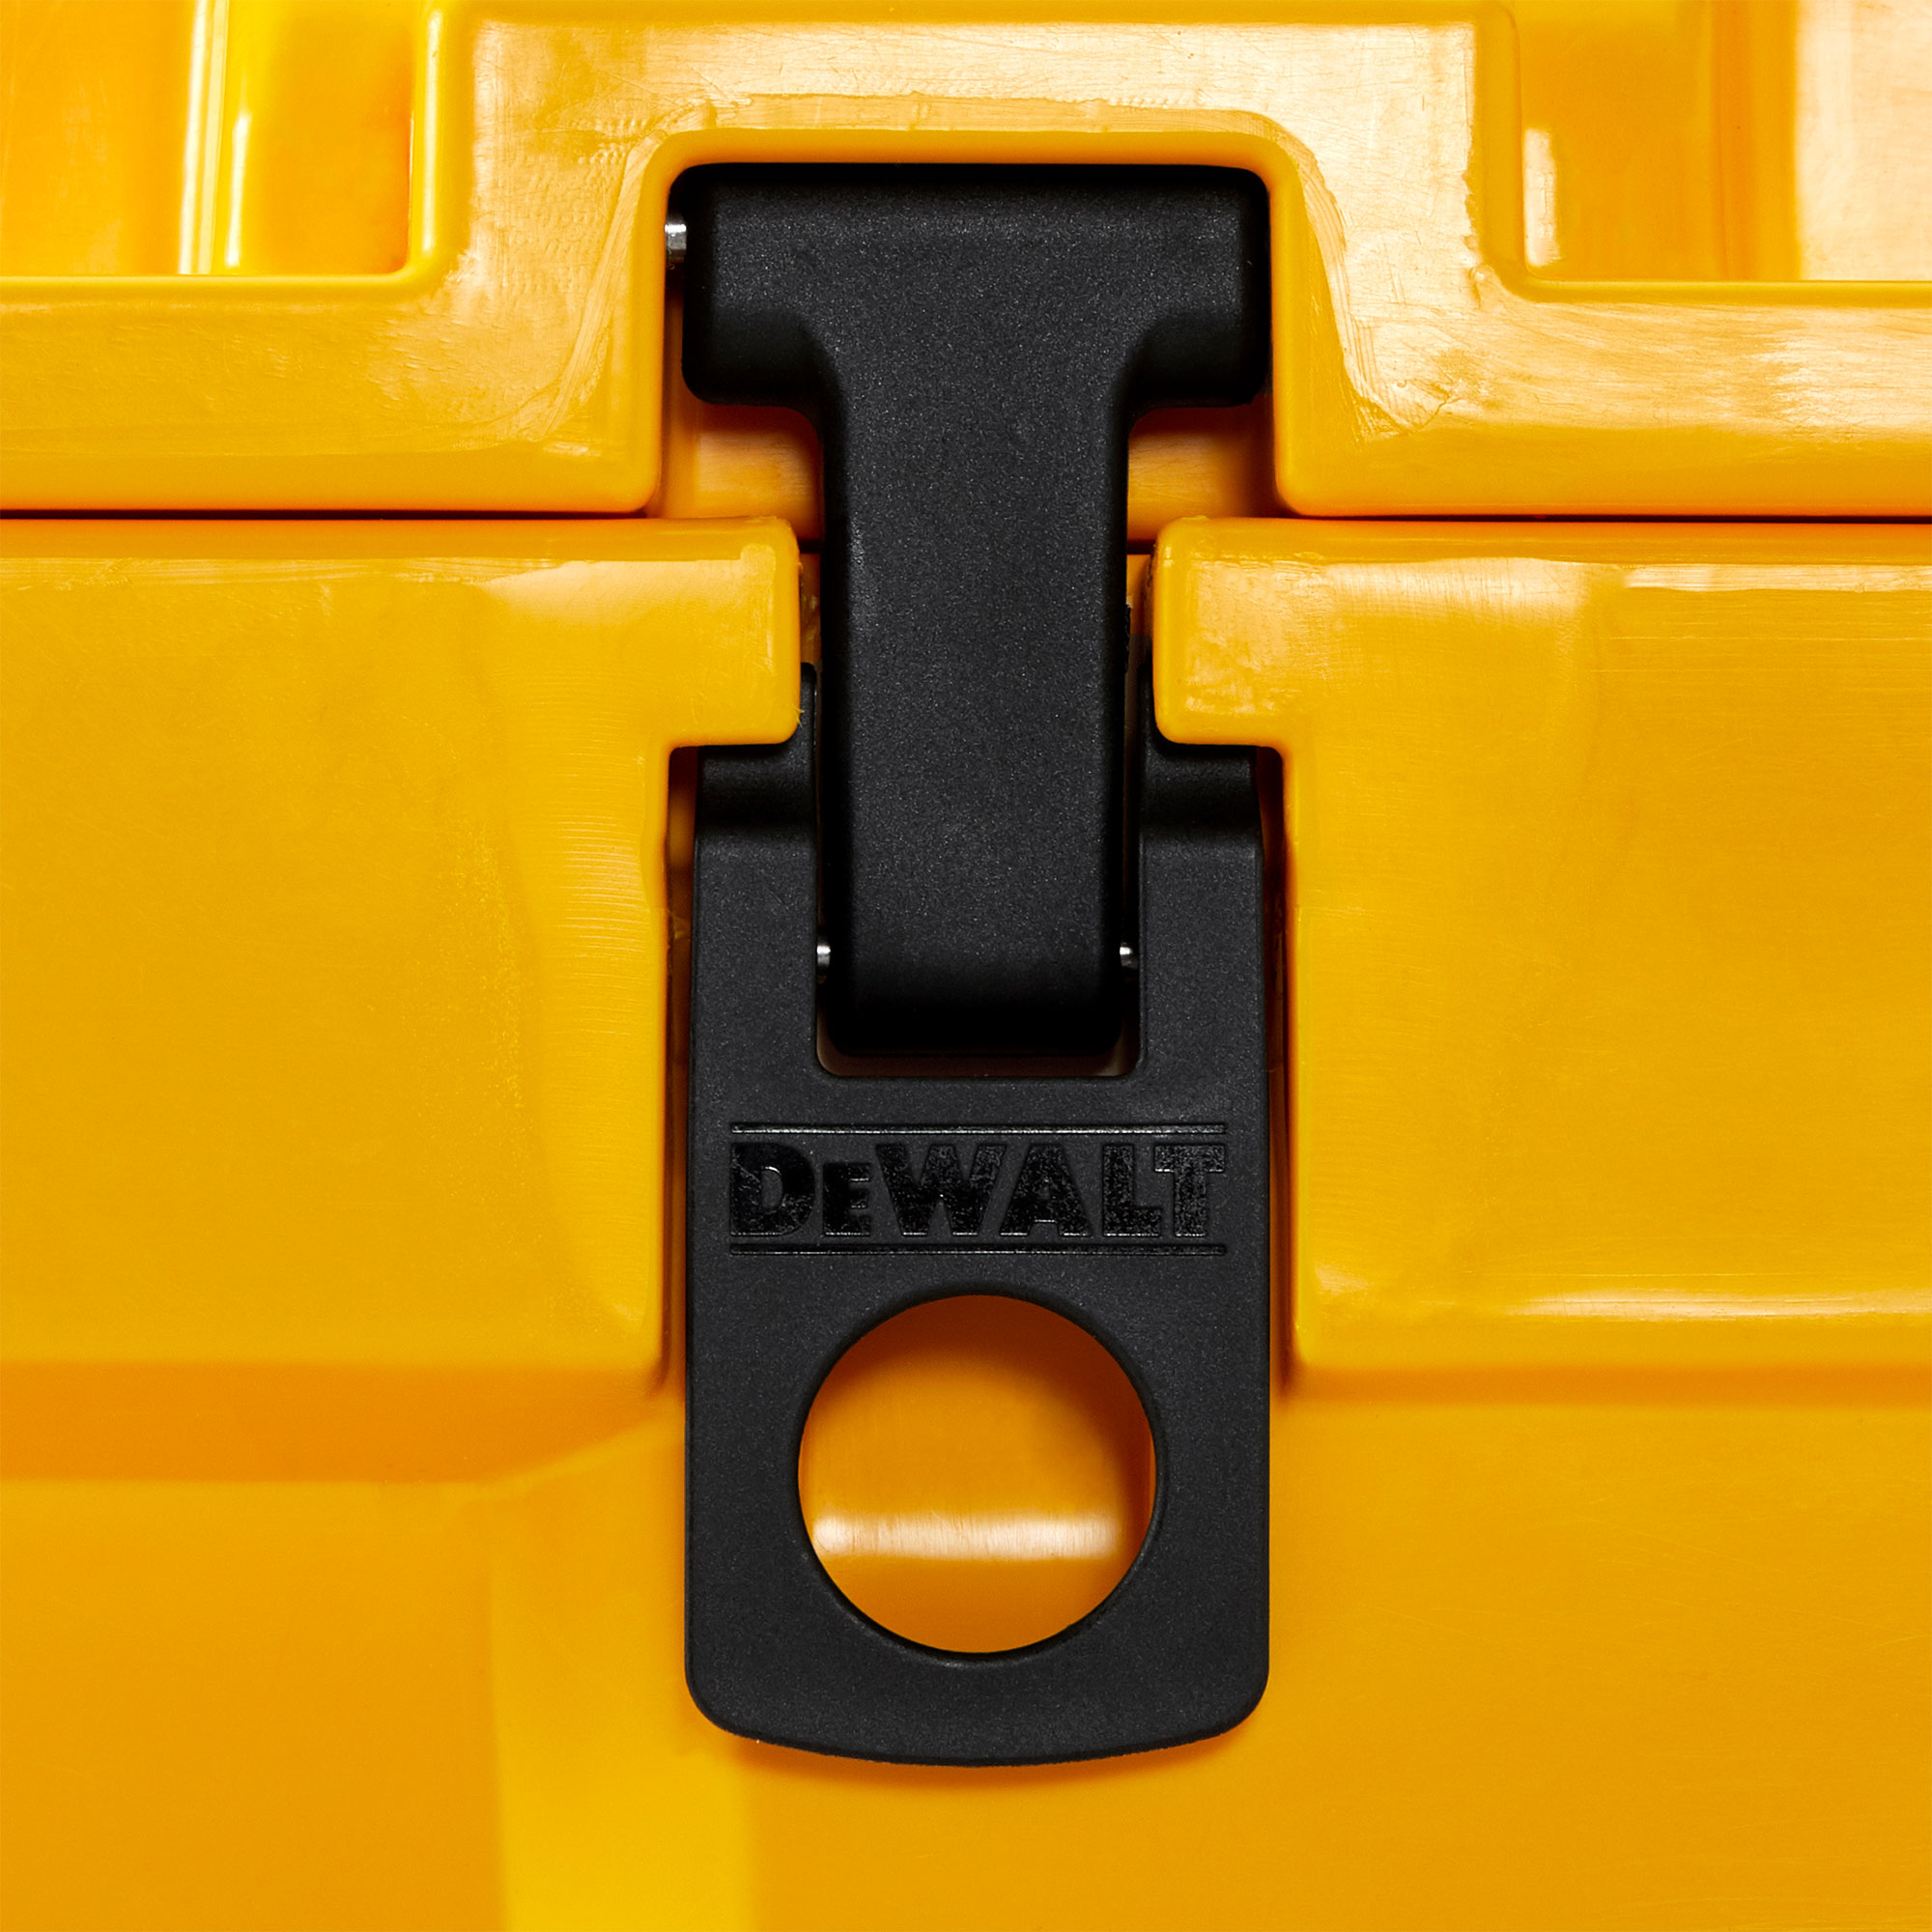 DeWalt 25 Quart Roto Molded Insulated Lunch Box Portable Drink Cooler, Yellow - image 5 of 7